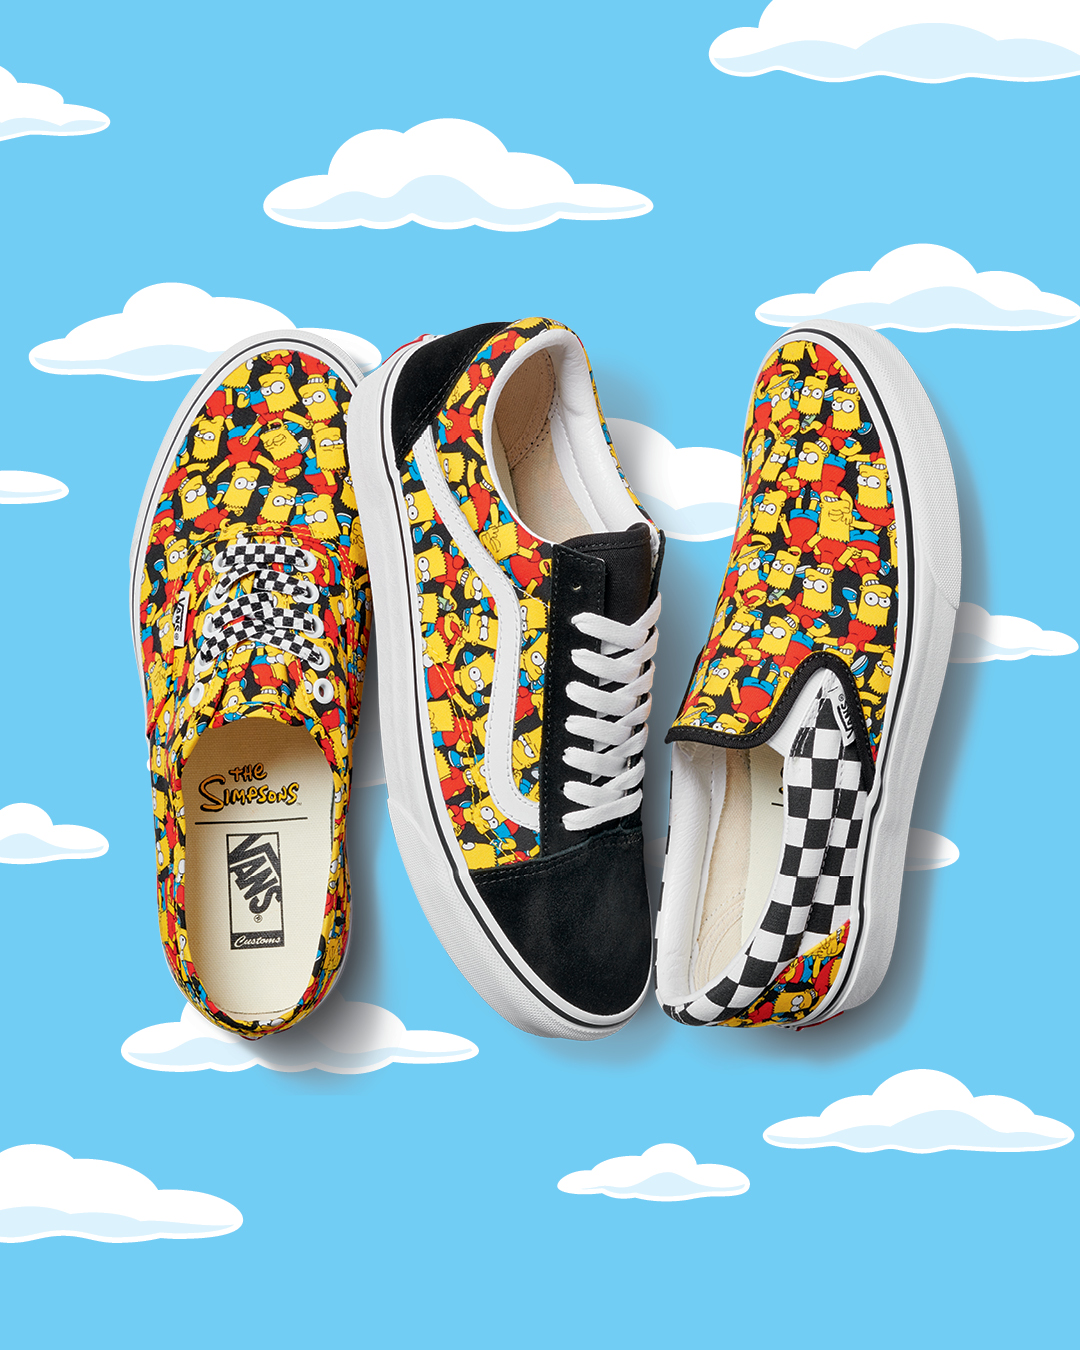 Terapi kapital Pearly VANS Europe on Twitter: "Springfield comes to the Vans Customs Shop with  exclusive The Simpsons x Vans prints. Start designing in our Customs  Creator Studio at https://t.co/AABy5QpVfS. https://t.co/mvMHdxpkQ2" /  Twitter